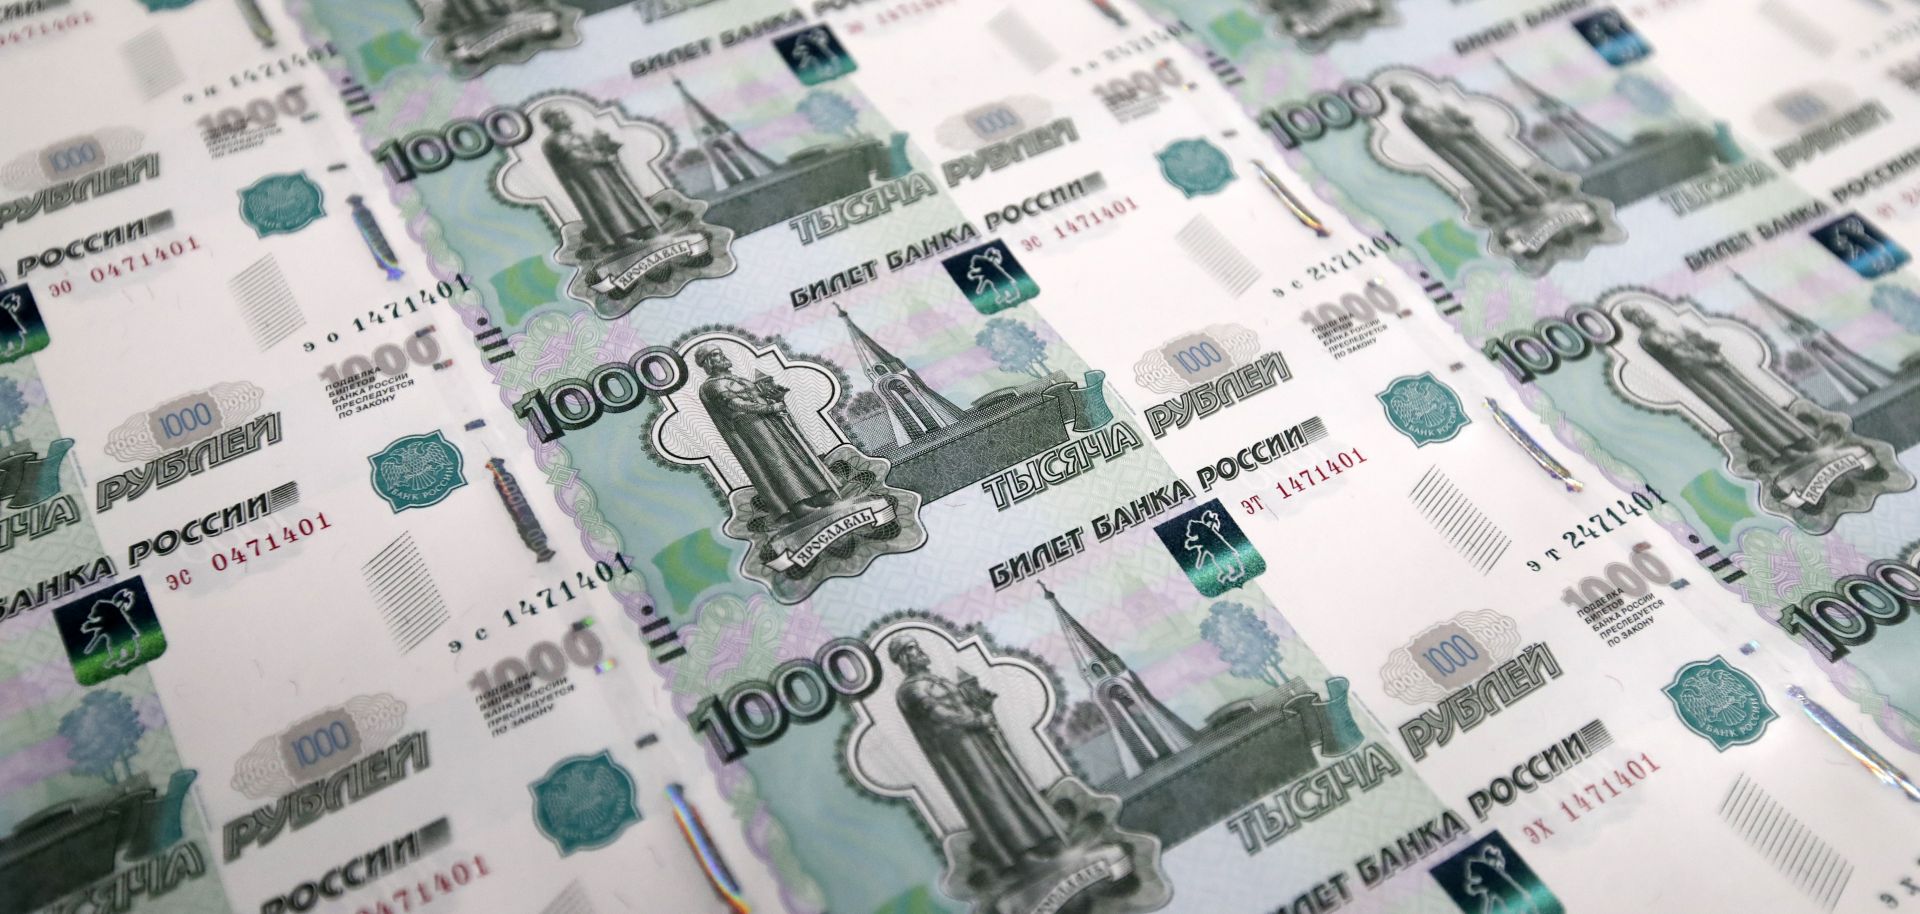 Russian 1,000-ruble banknotes are printed at the Moscow Printing Factory owned by Goznak.